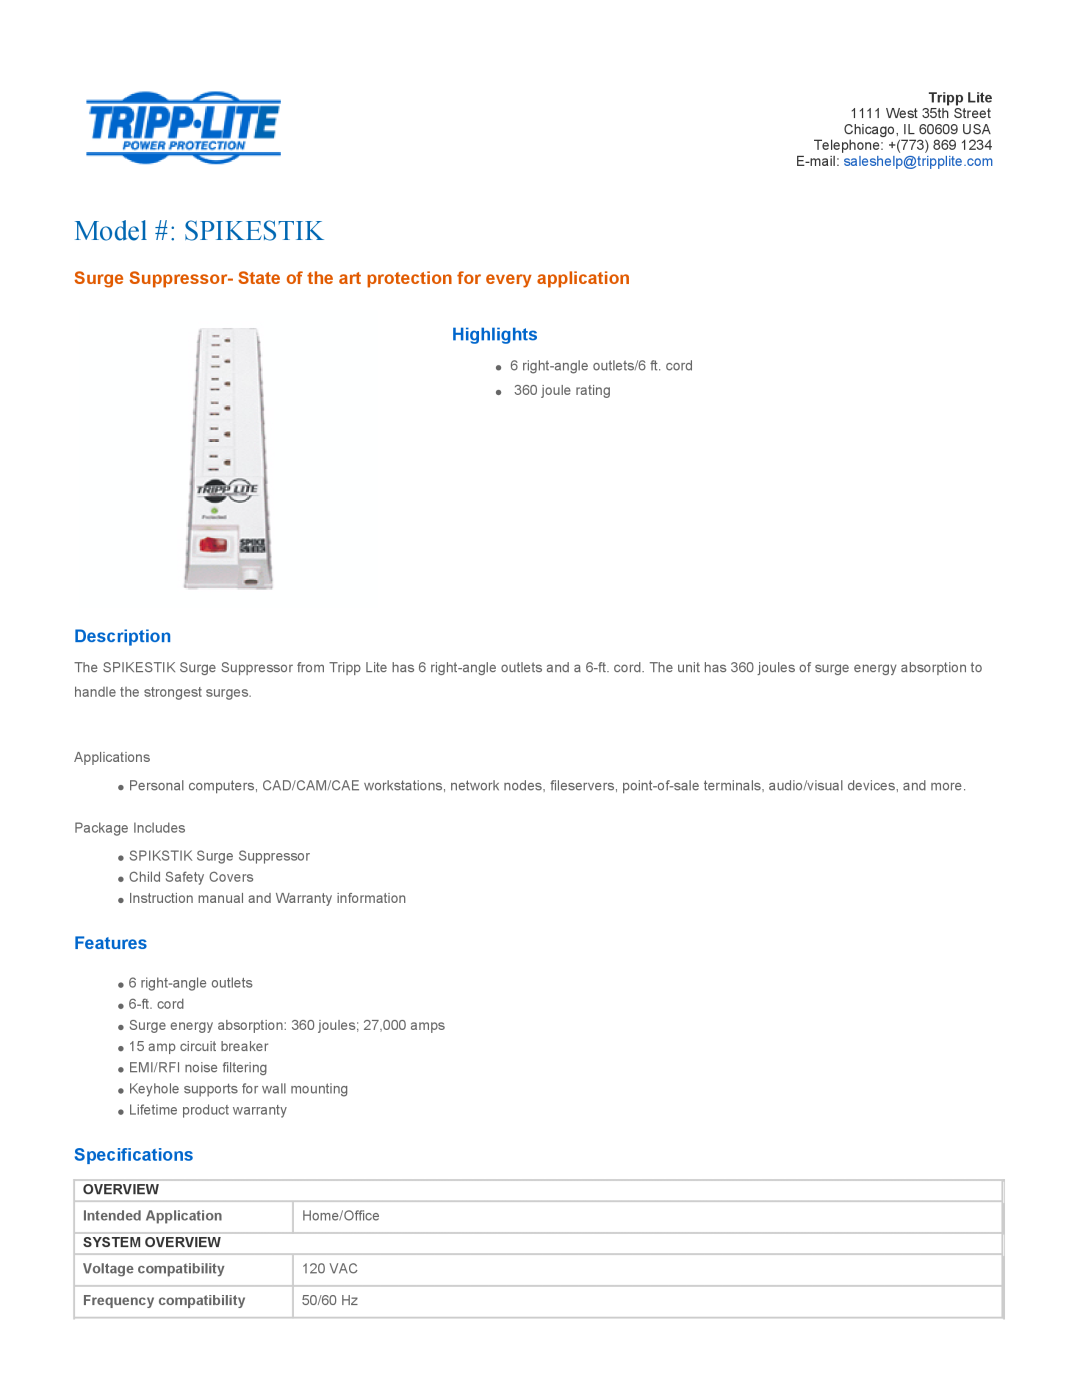 Tripp Lite specifications System Overview, Model # SPIKESTIK, Highlights, Description, Features, Specifications 